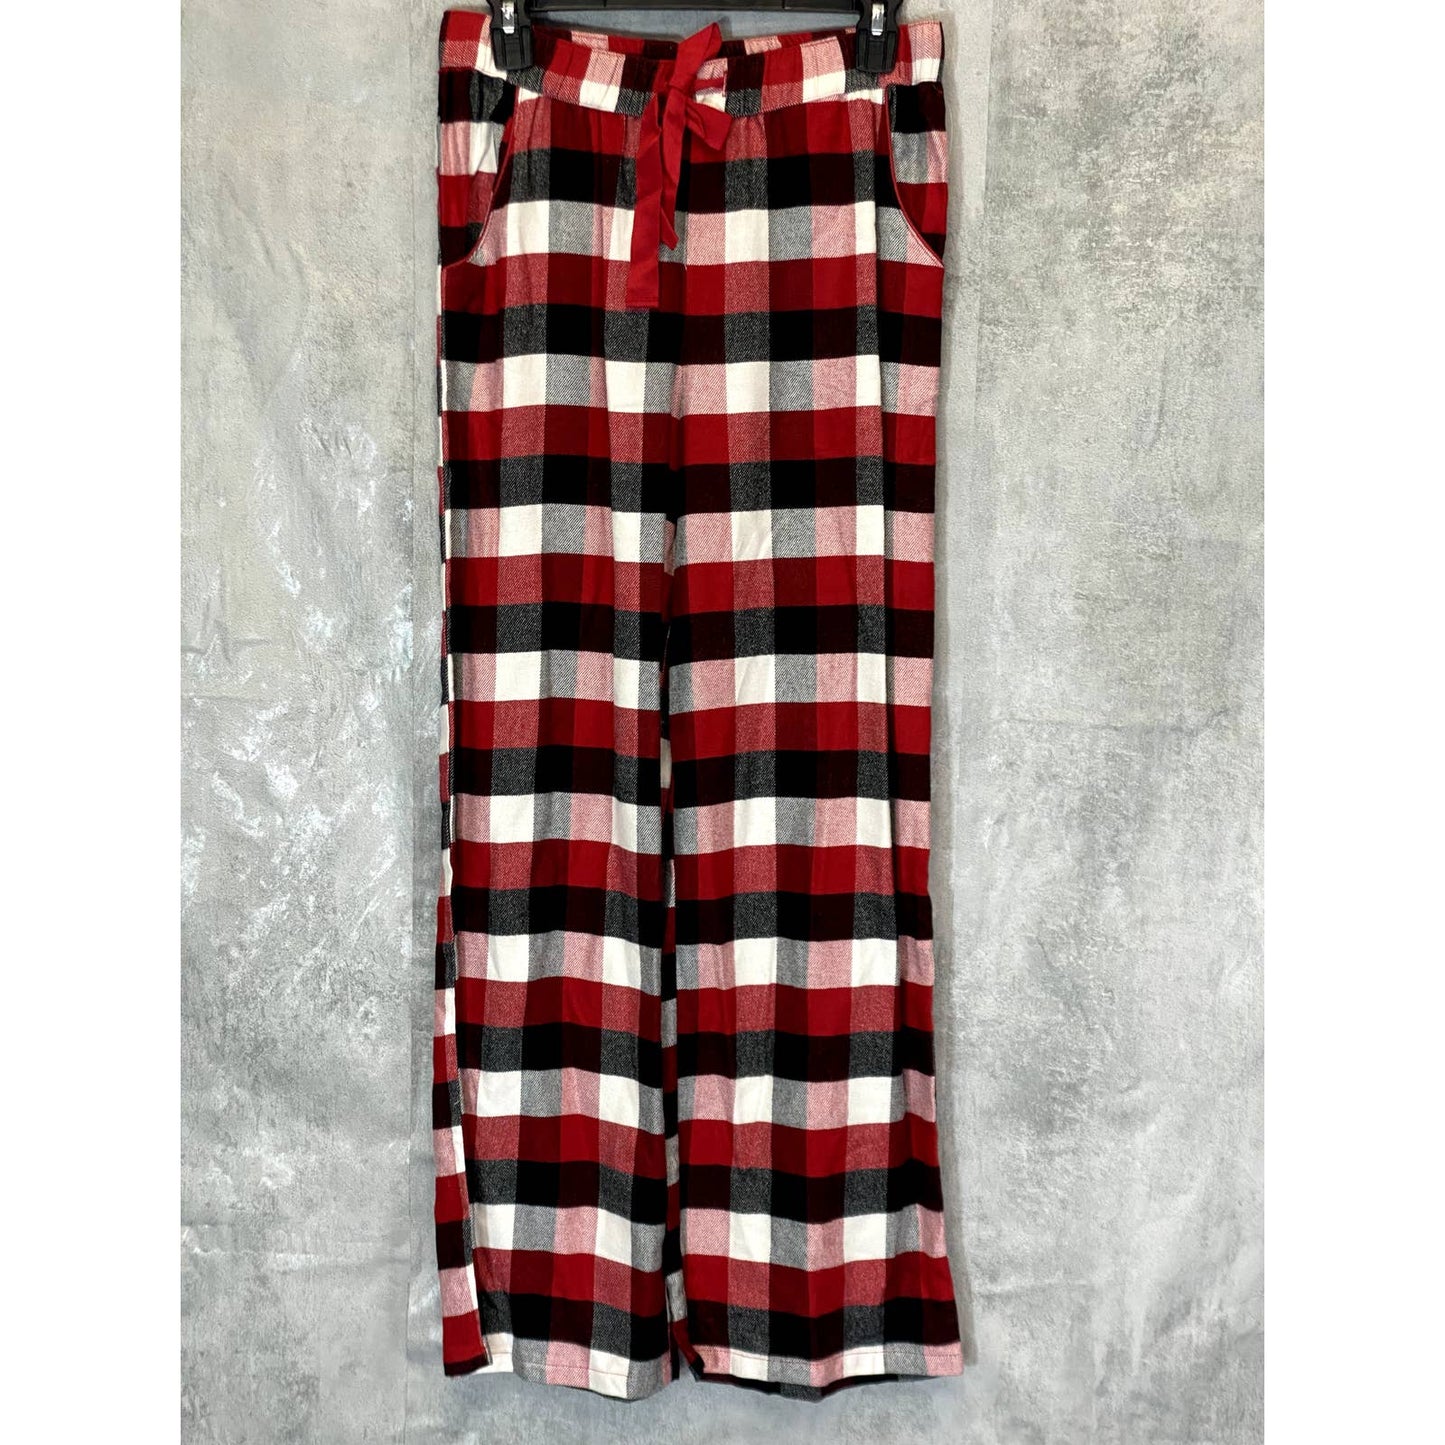 NORDSTROM Women's Red Chili August Check 2-Piece Button-Front Pull-on Pajama Set SZ S